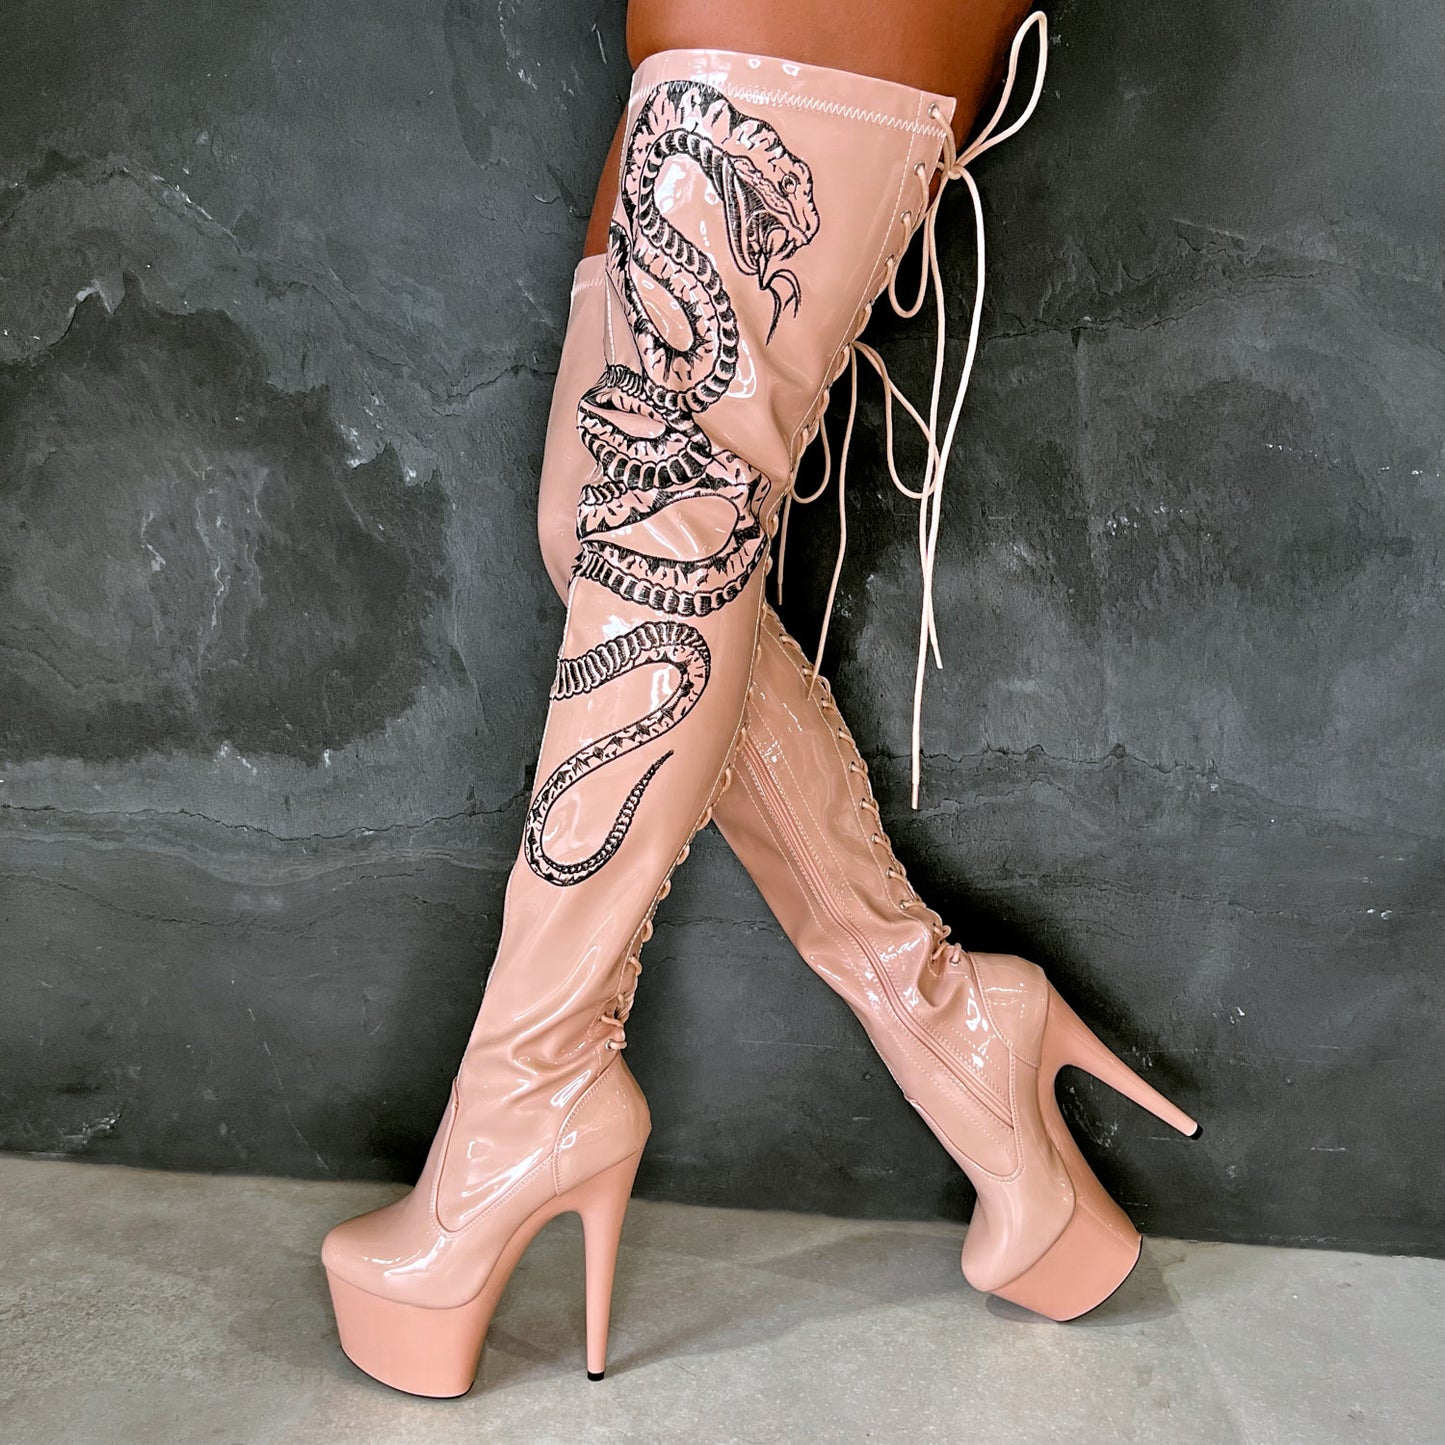 VIPER Boot Tan with Black Thigh High - 7INCH